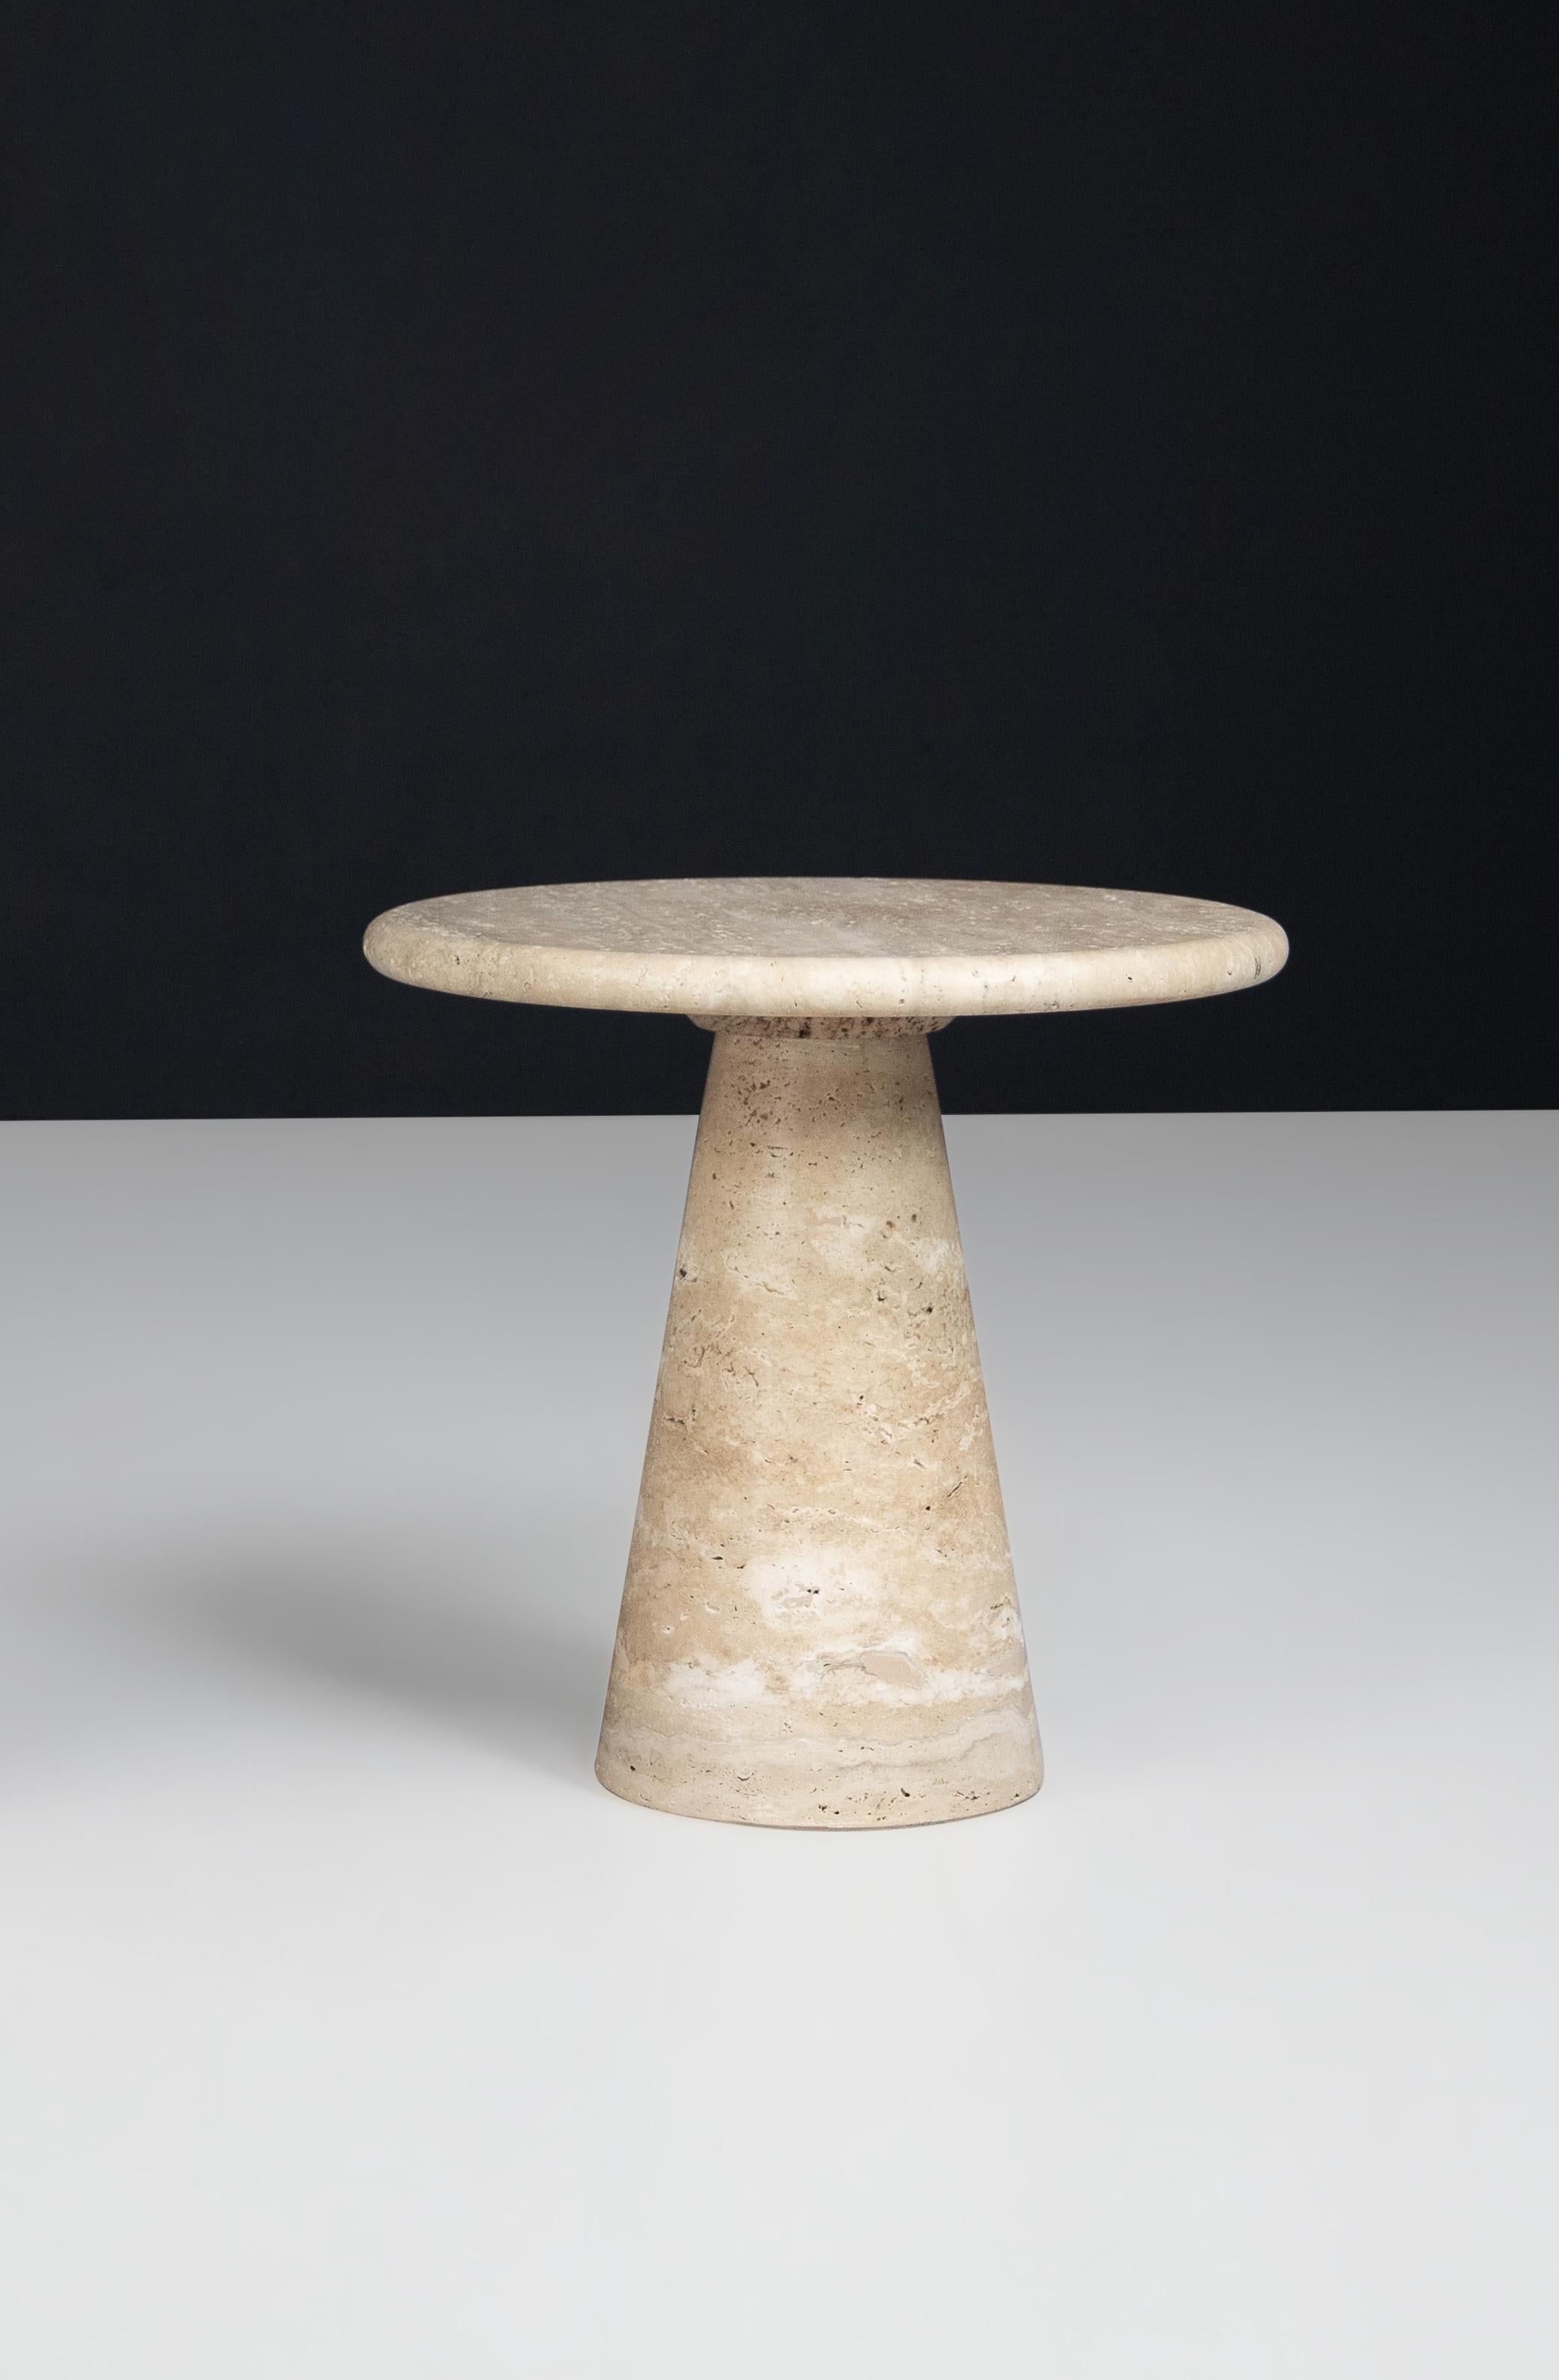  Travertine Circular Side Tables or Coffee Tables, Italy, 1980s  For Sale 4